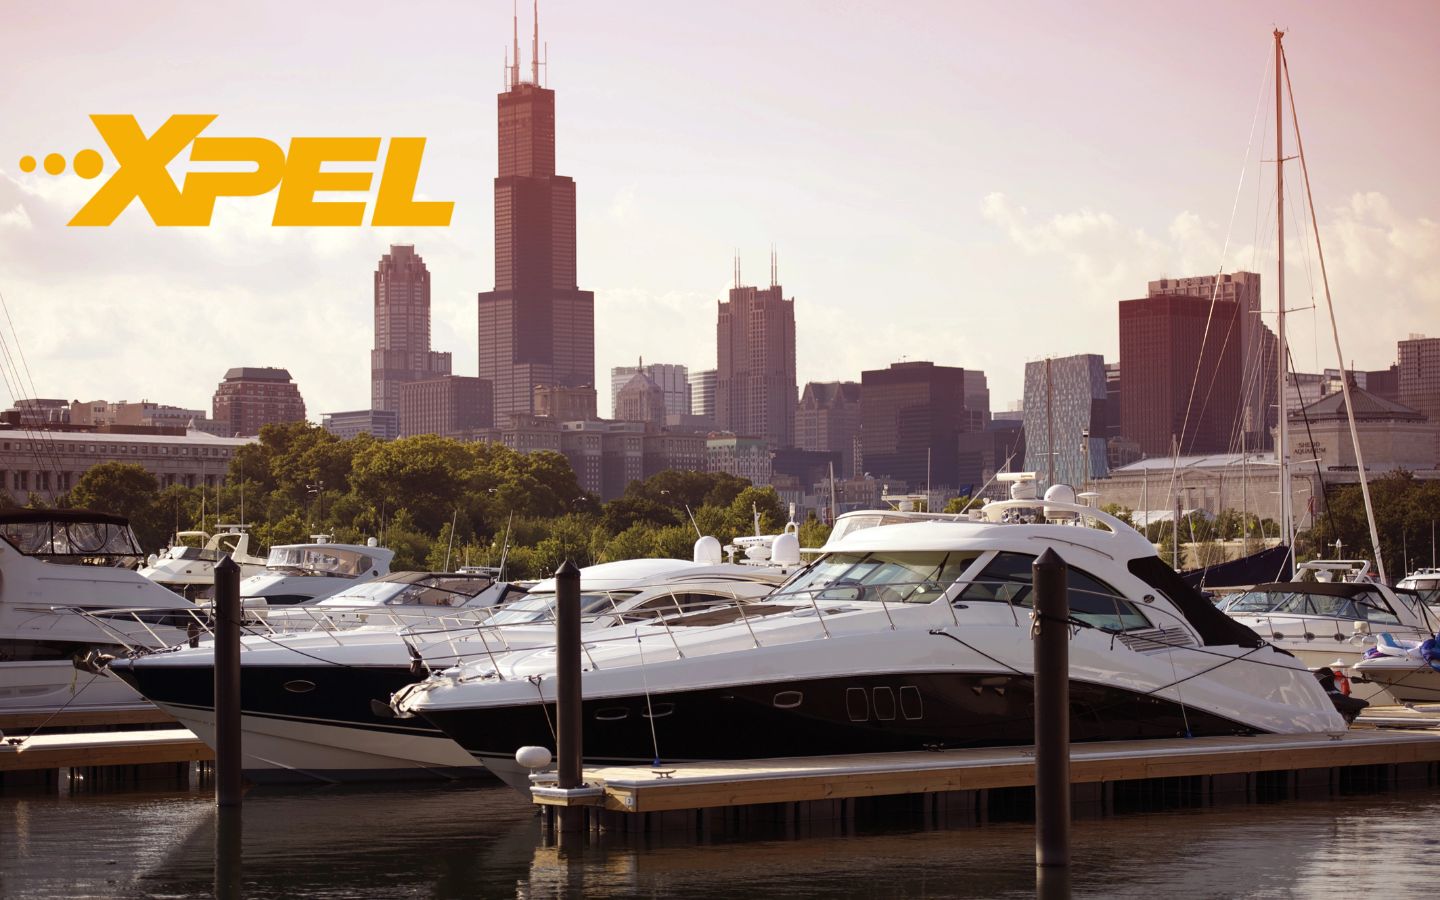 Protect your boat with XPEL marine surface film